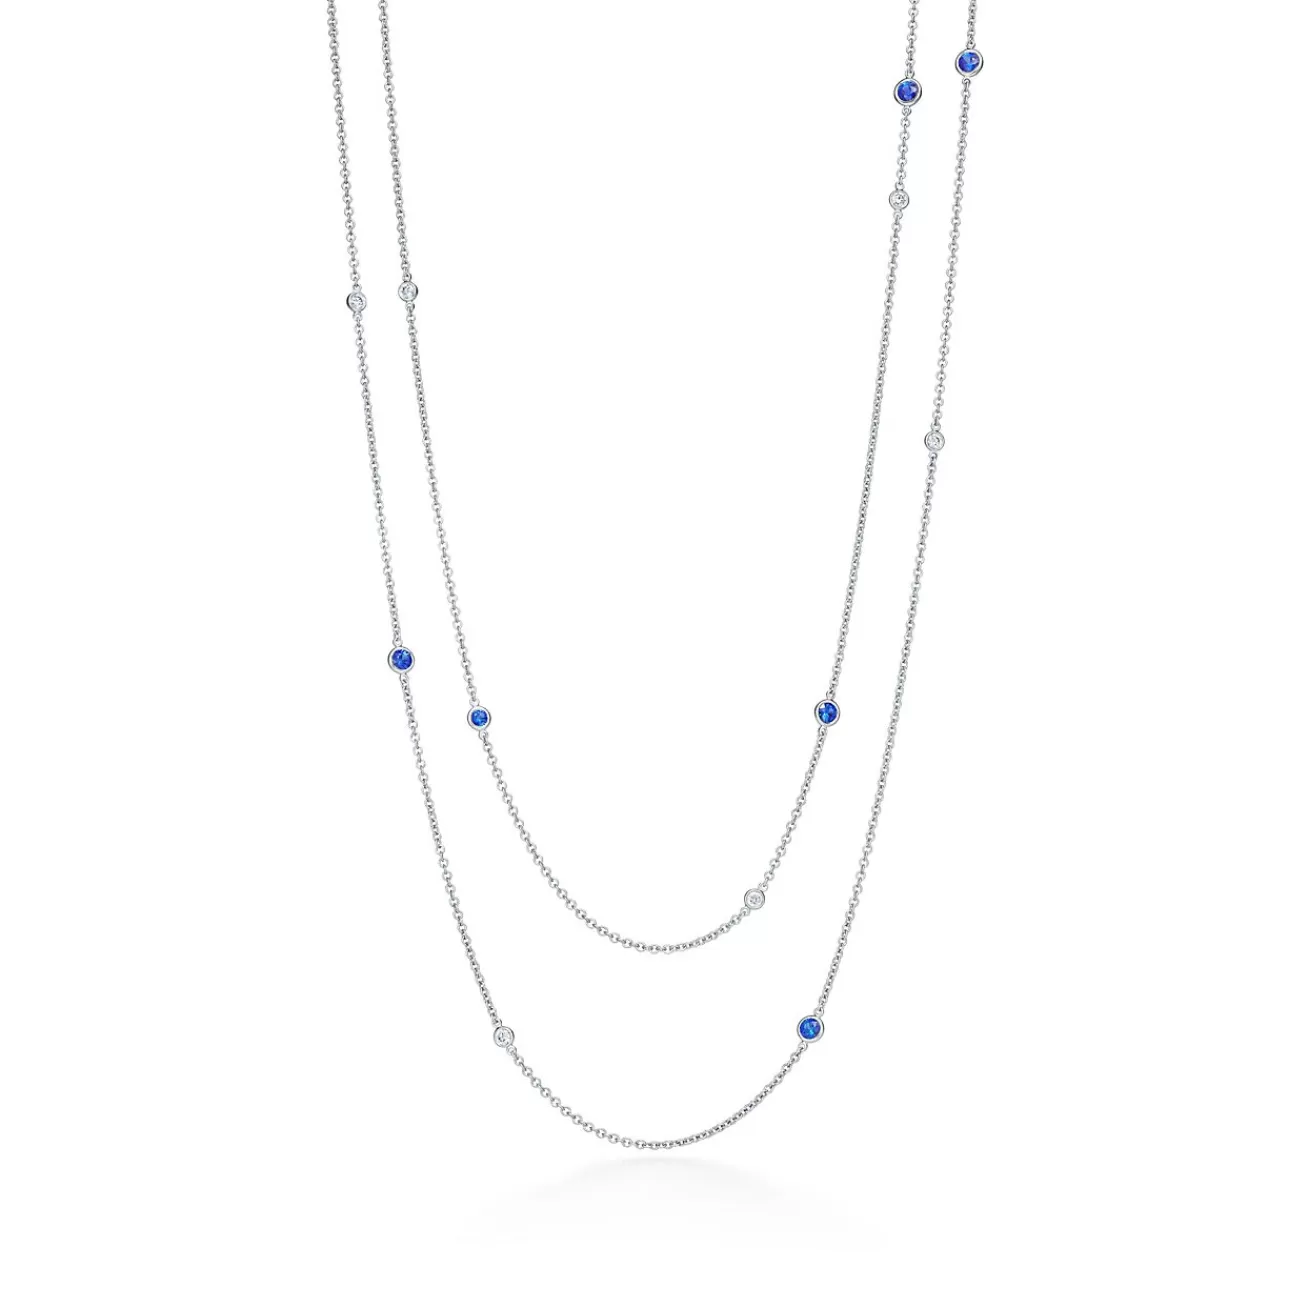 Tiffany & Co. Elsa Peretti® Color by the Yard sprinkle necklace in platinum with gemstones. | ^ Necklaces & Pendants | Platinum Jewelry